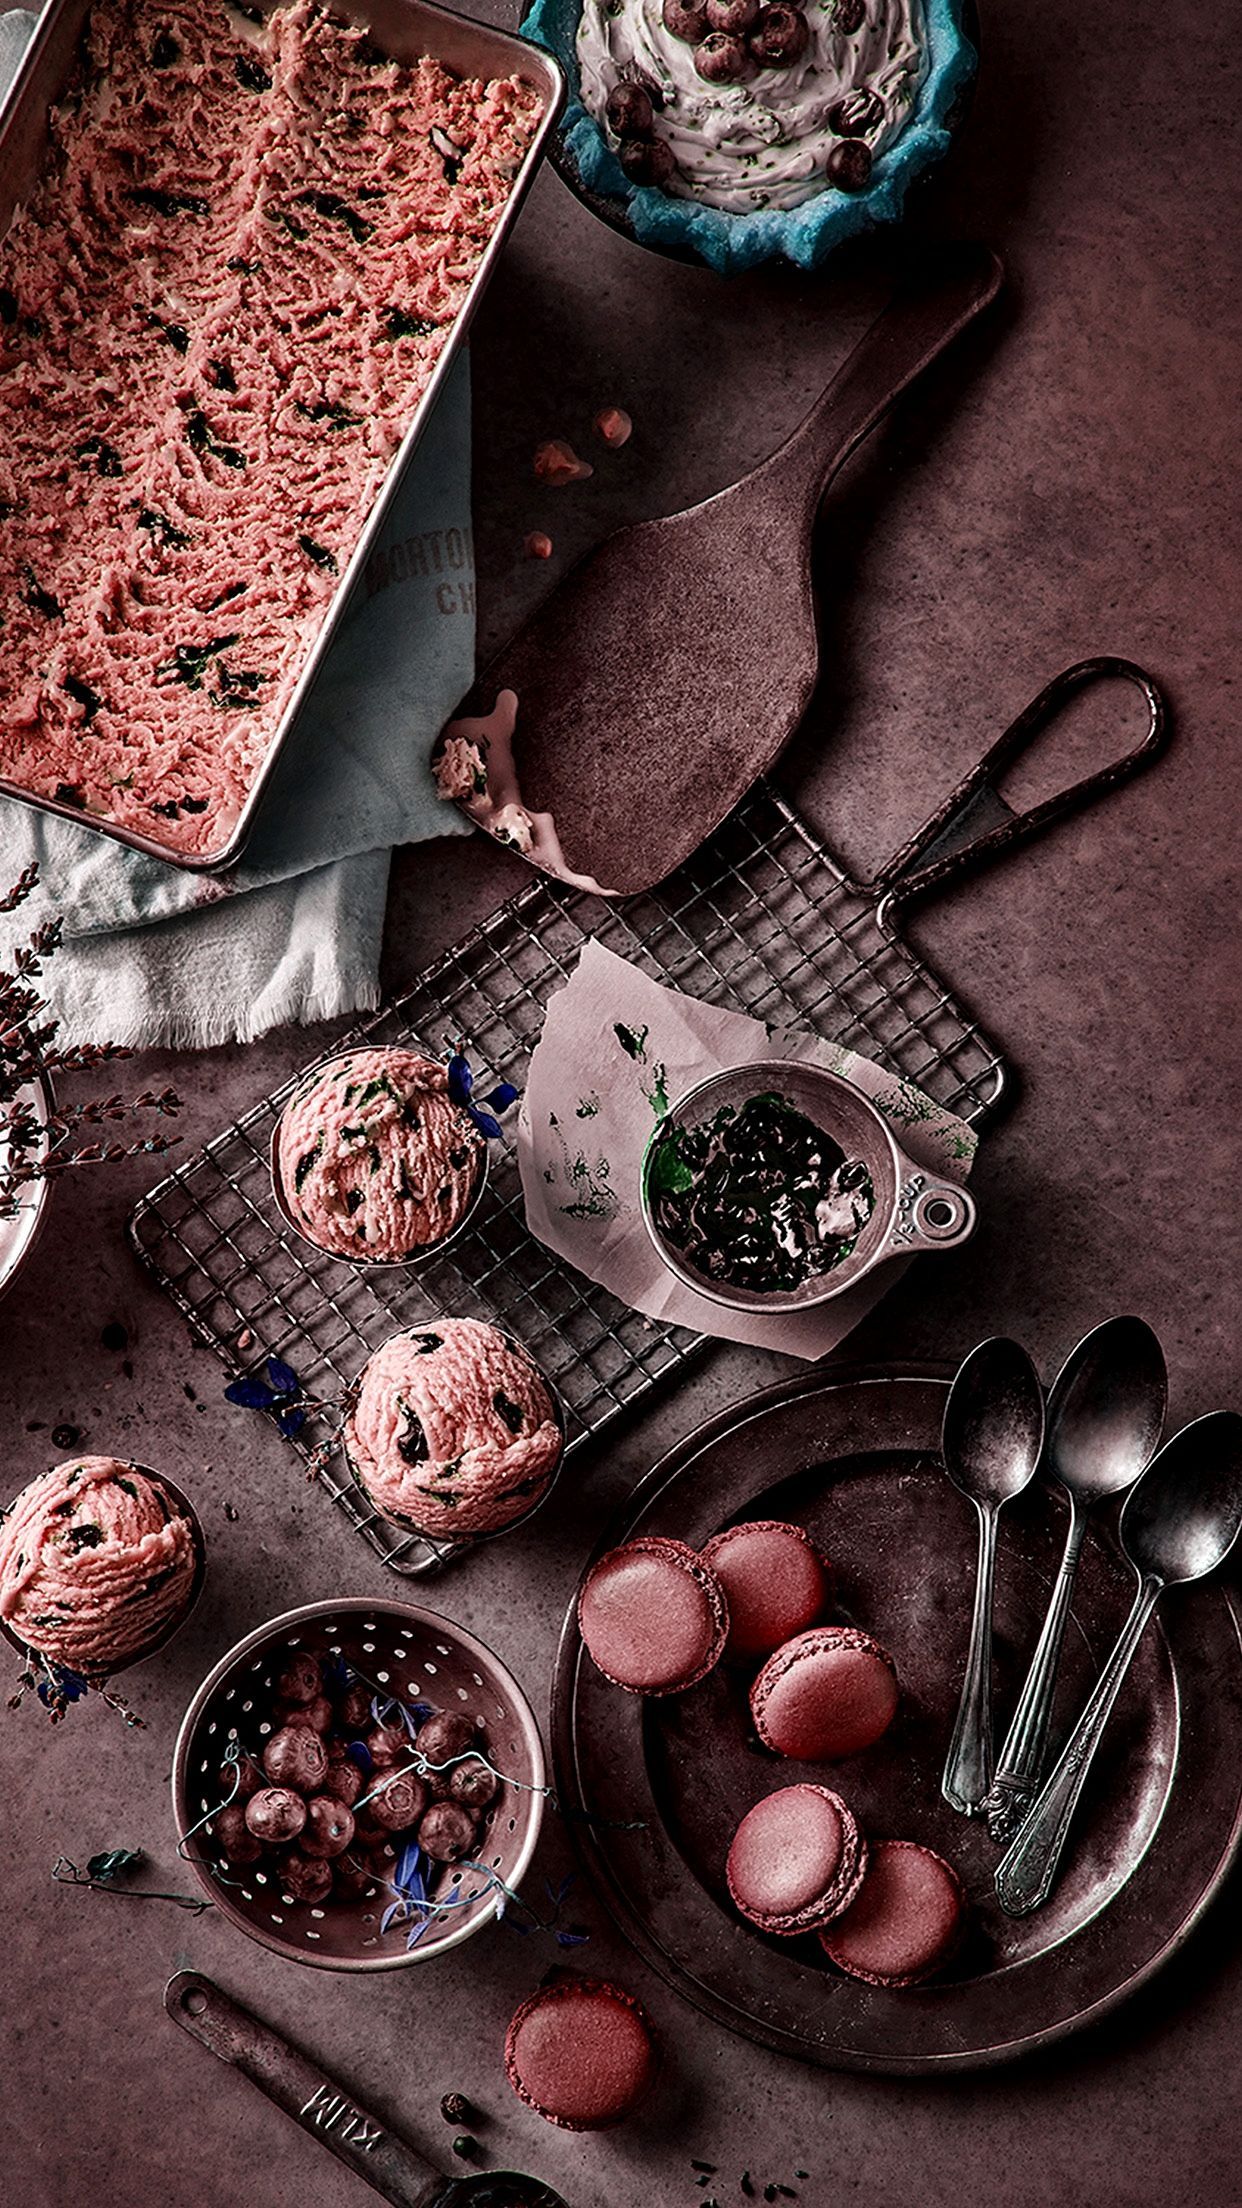 Pink ice cream in a metal pan with spoons and bowls of toppings. - Bakery